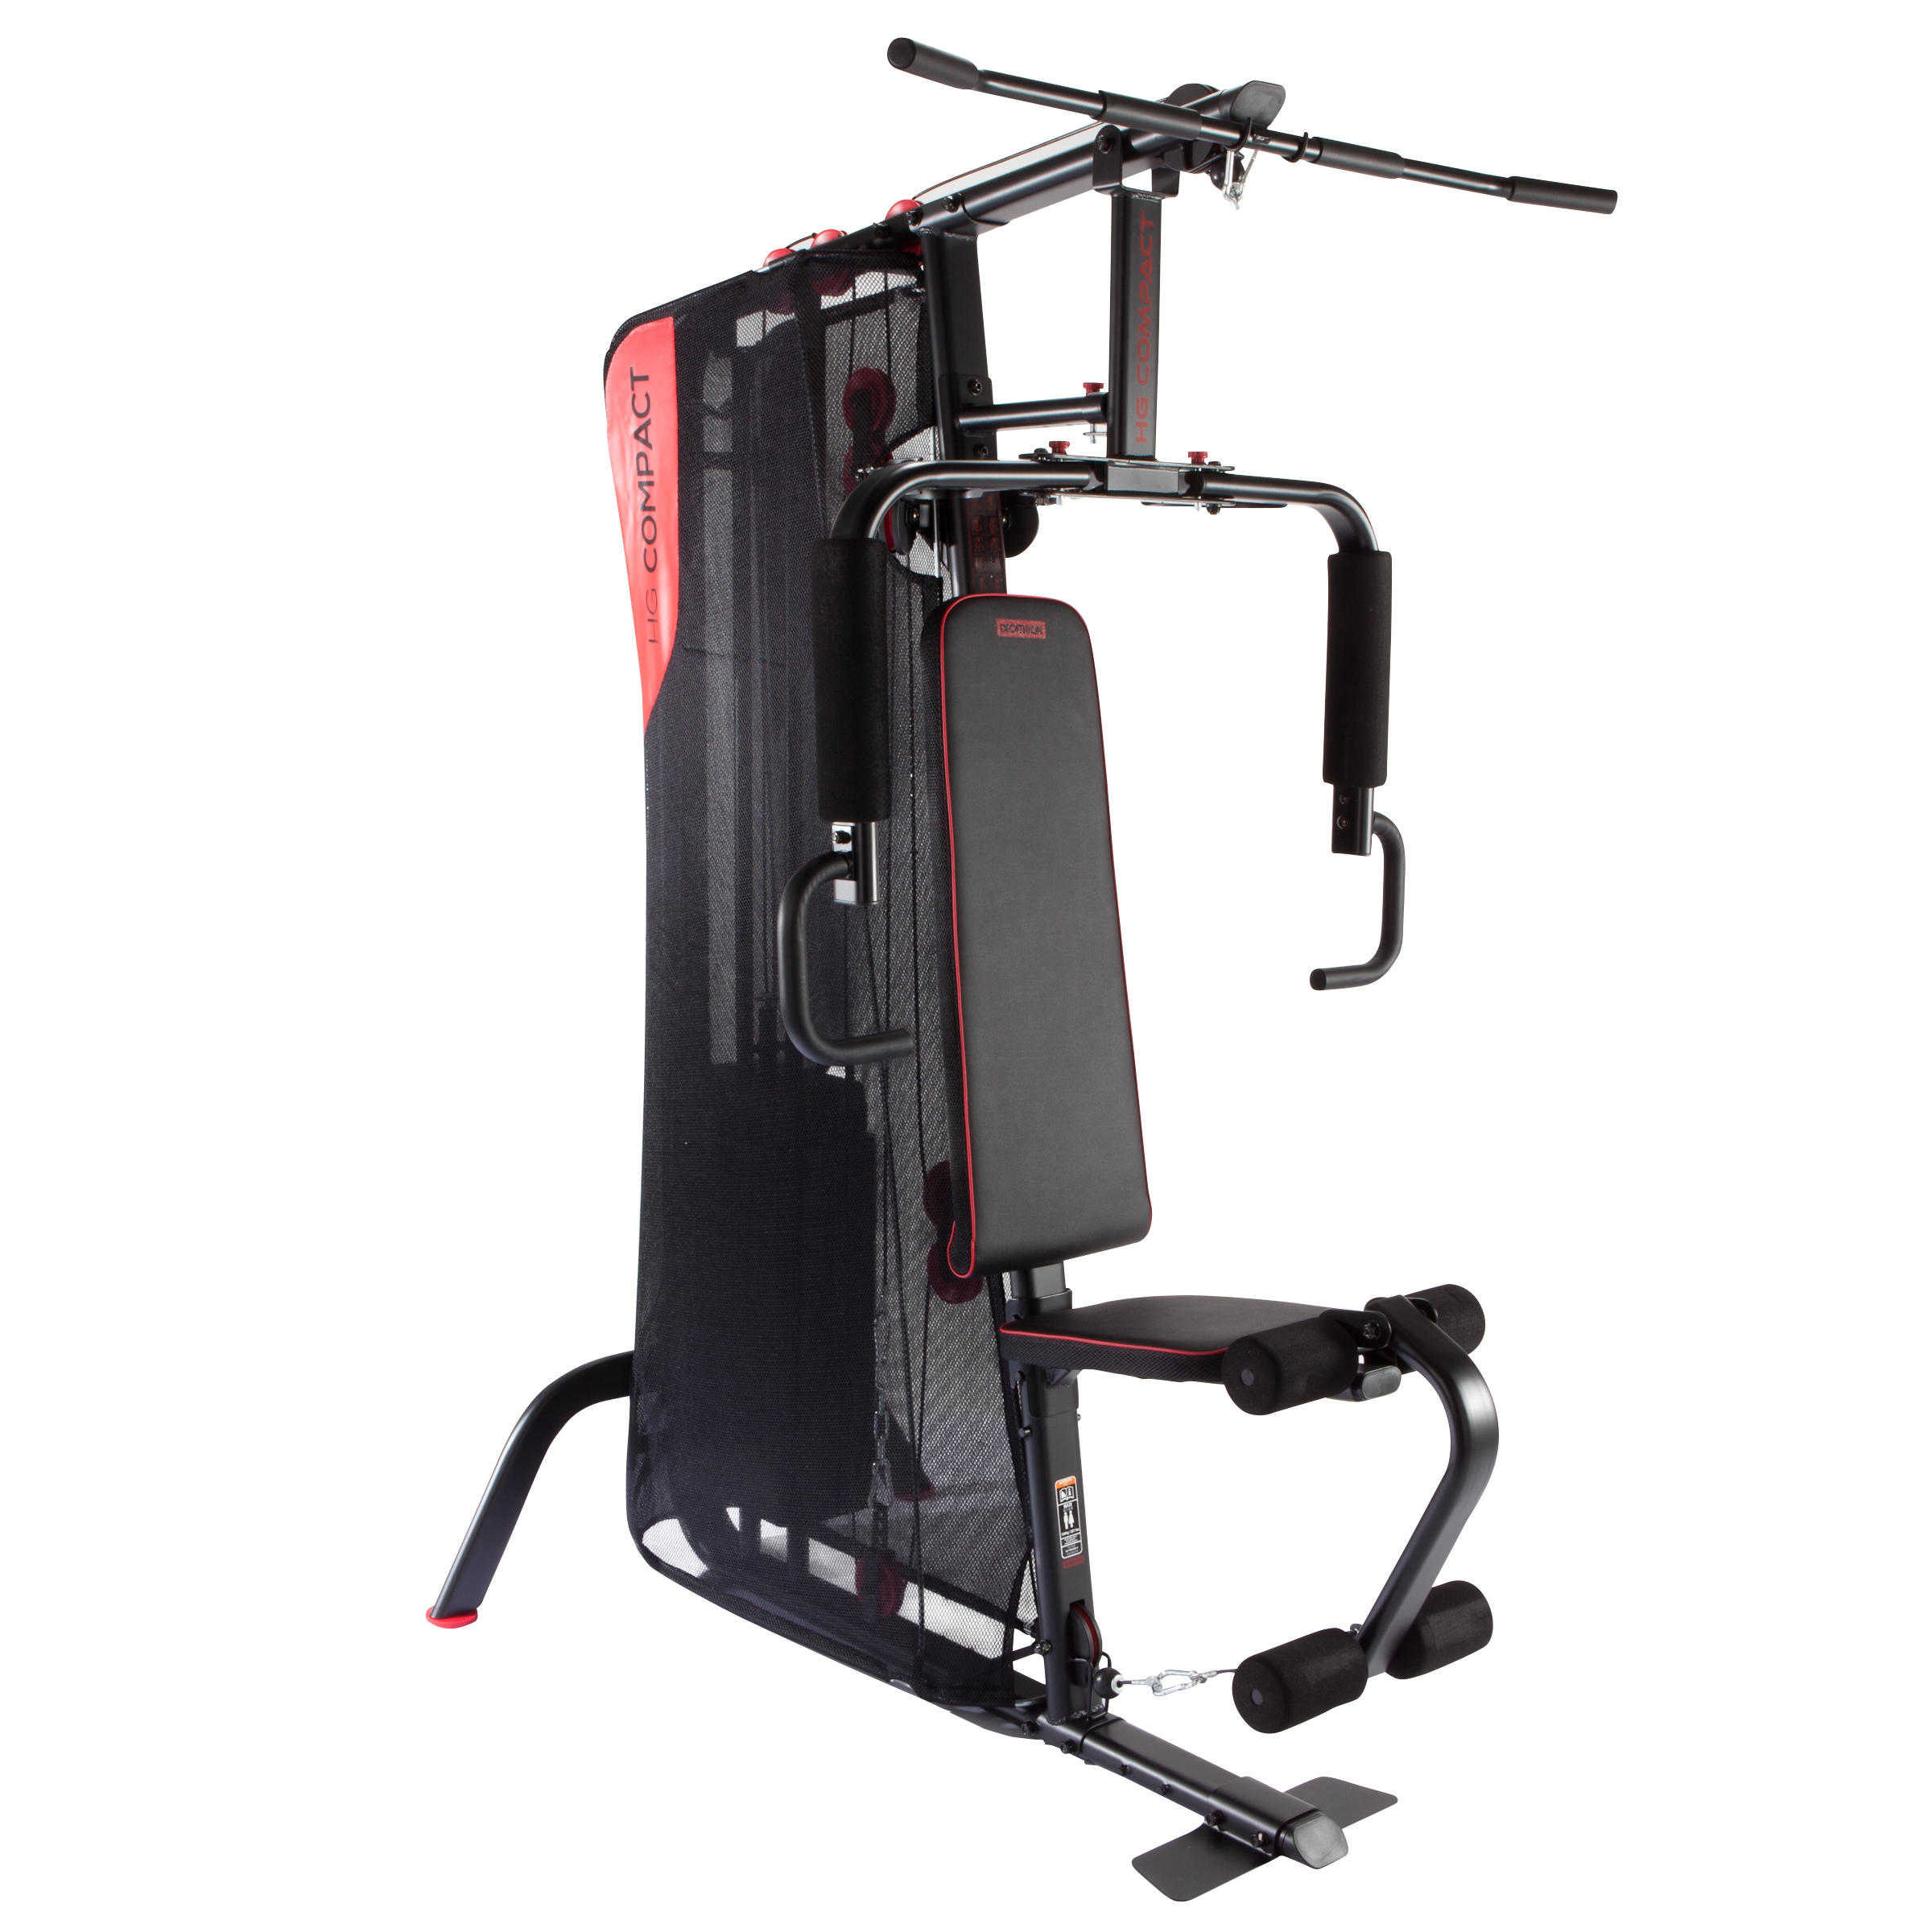 Weight Training Compact Home Gym DOMYOS 